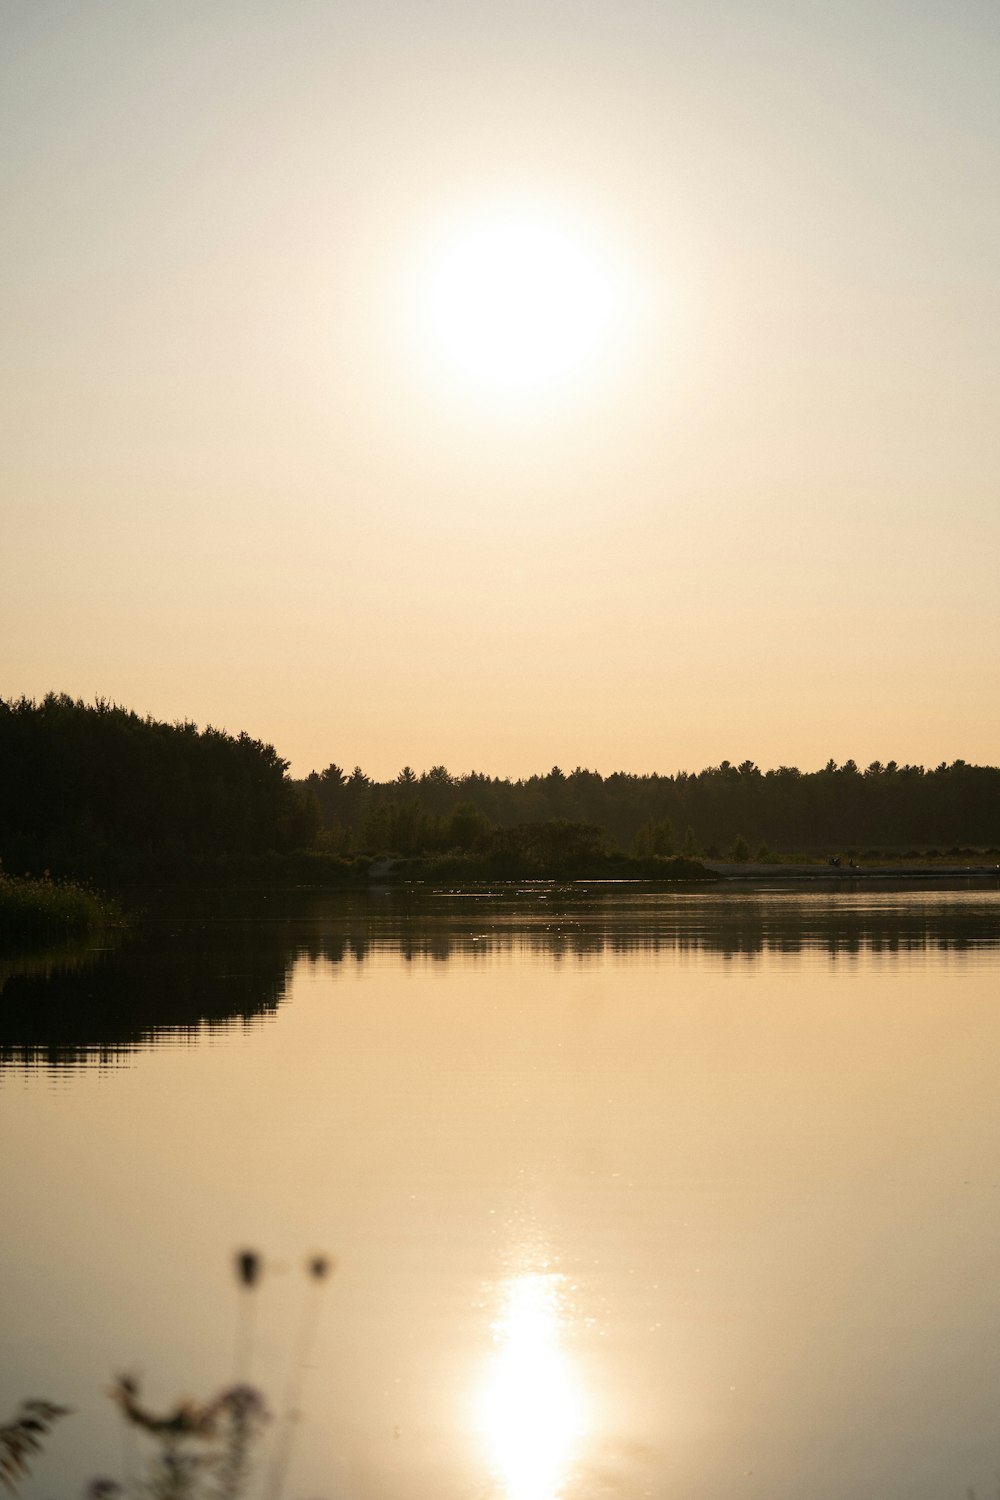 the sun is setting over a lake with trees in the background